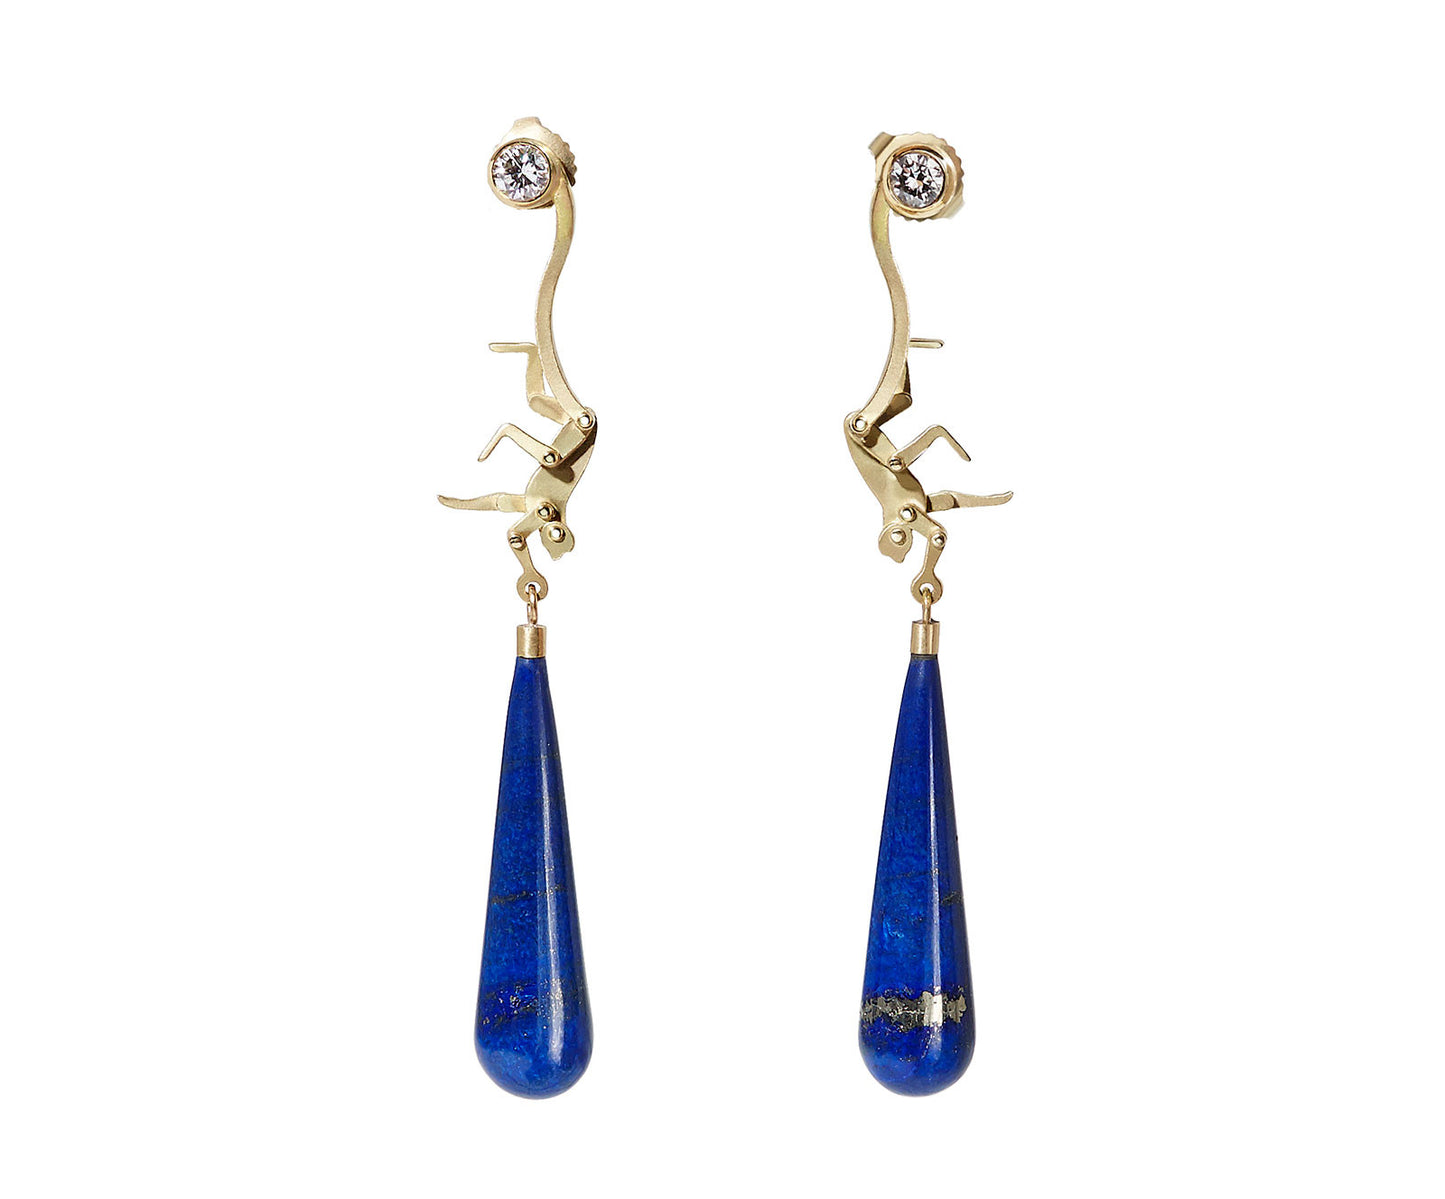 Micro Monkey Drop Earrings | Yellow Gold and Lapis